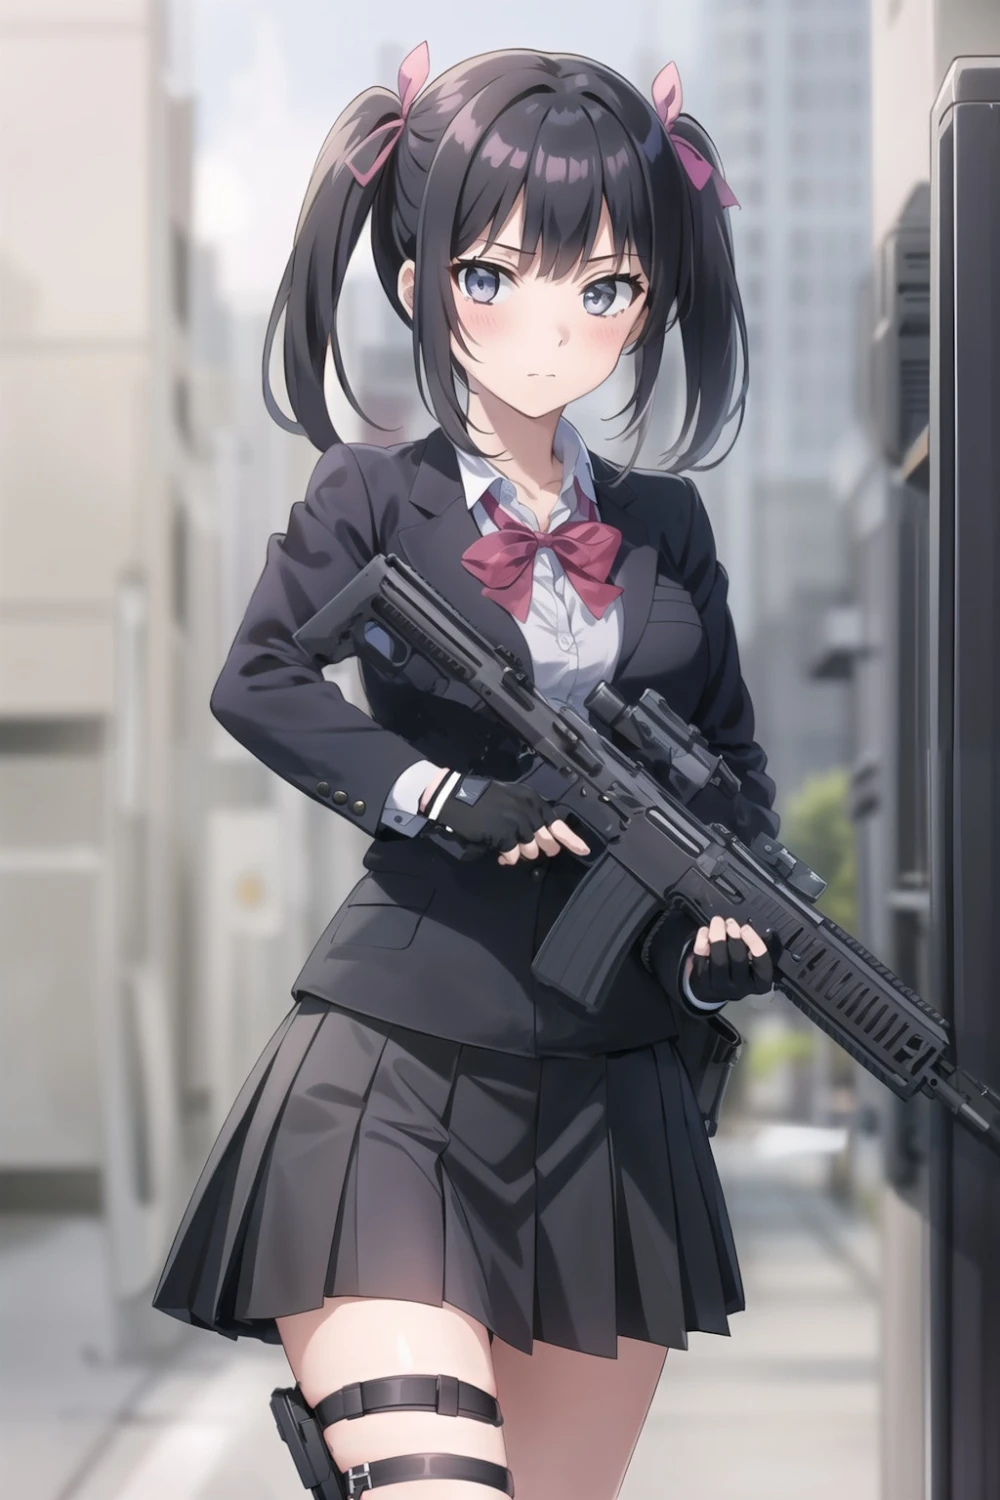 gun-anime-style-all-ages-49